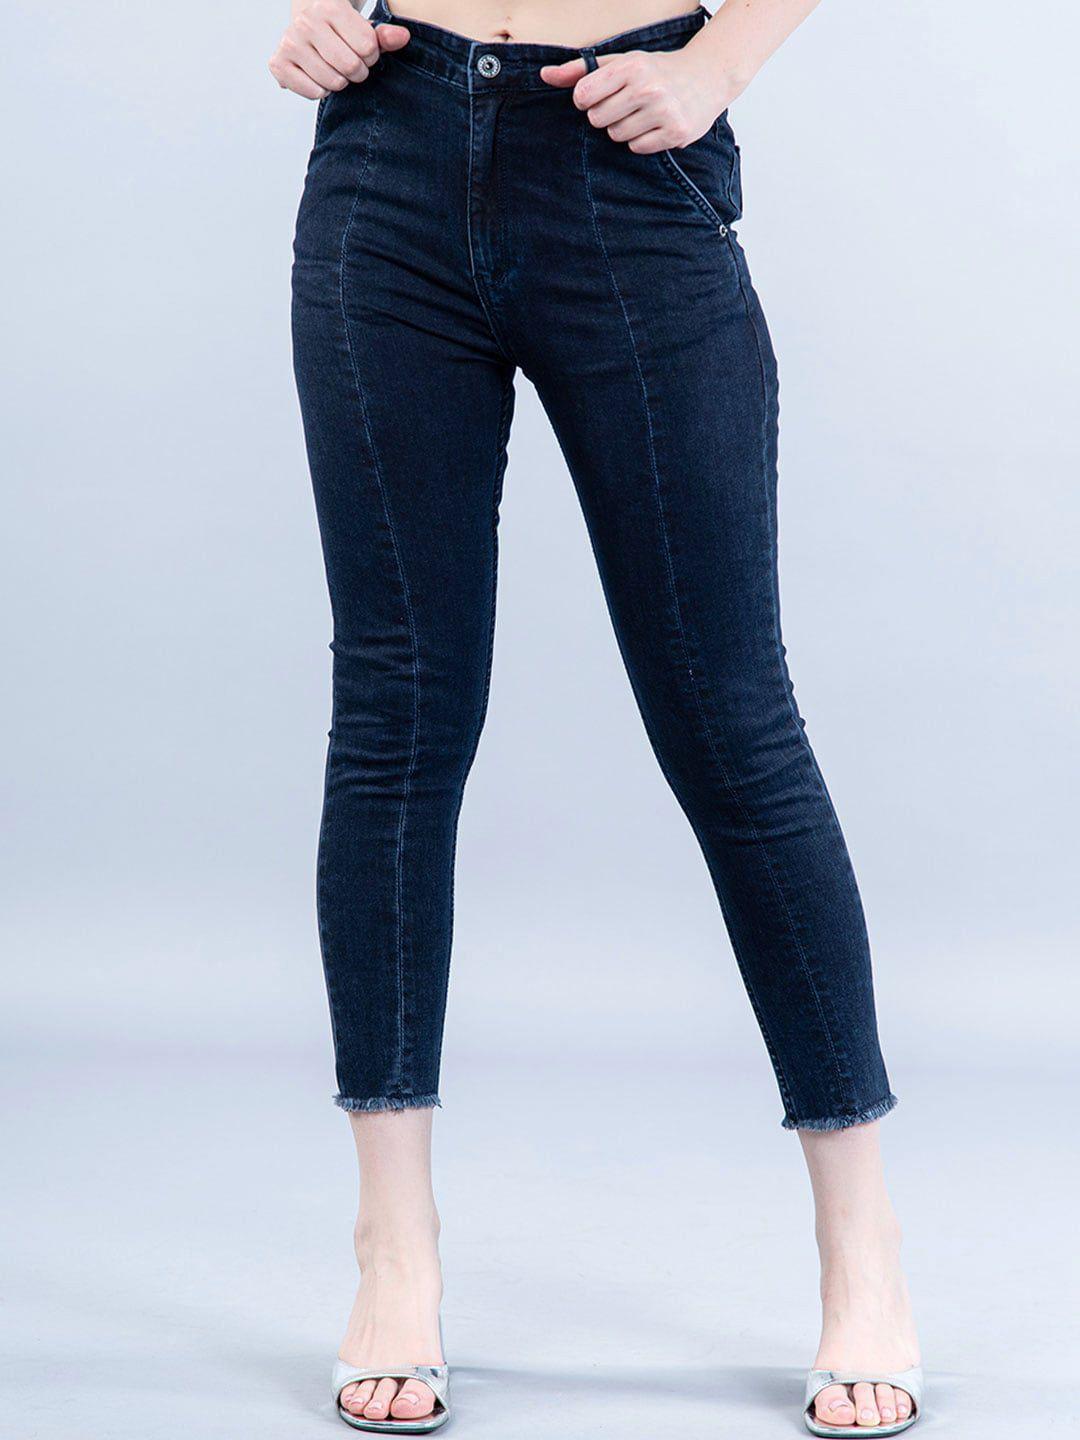 tistabene-women-low-distress-stretchable-comfort-skinny-fit-jeans